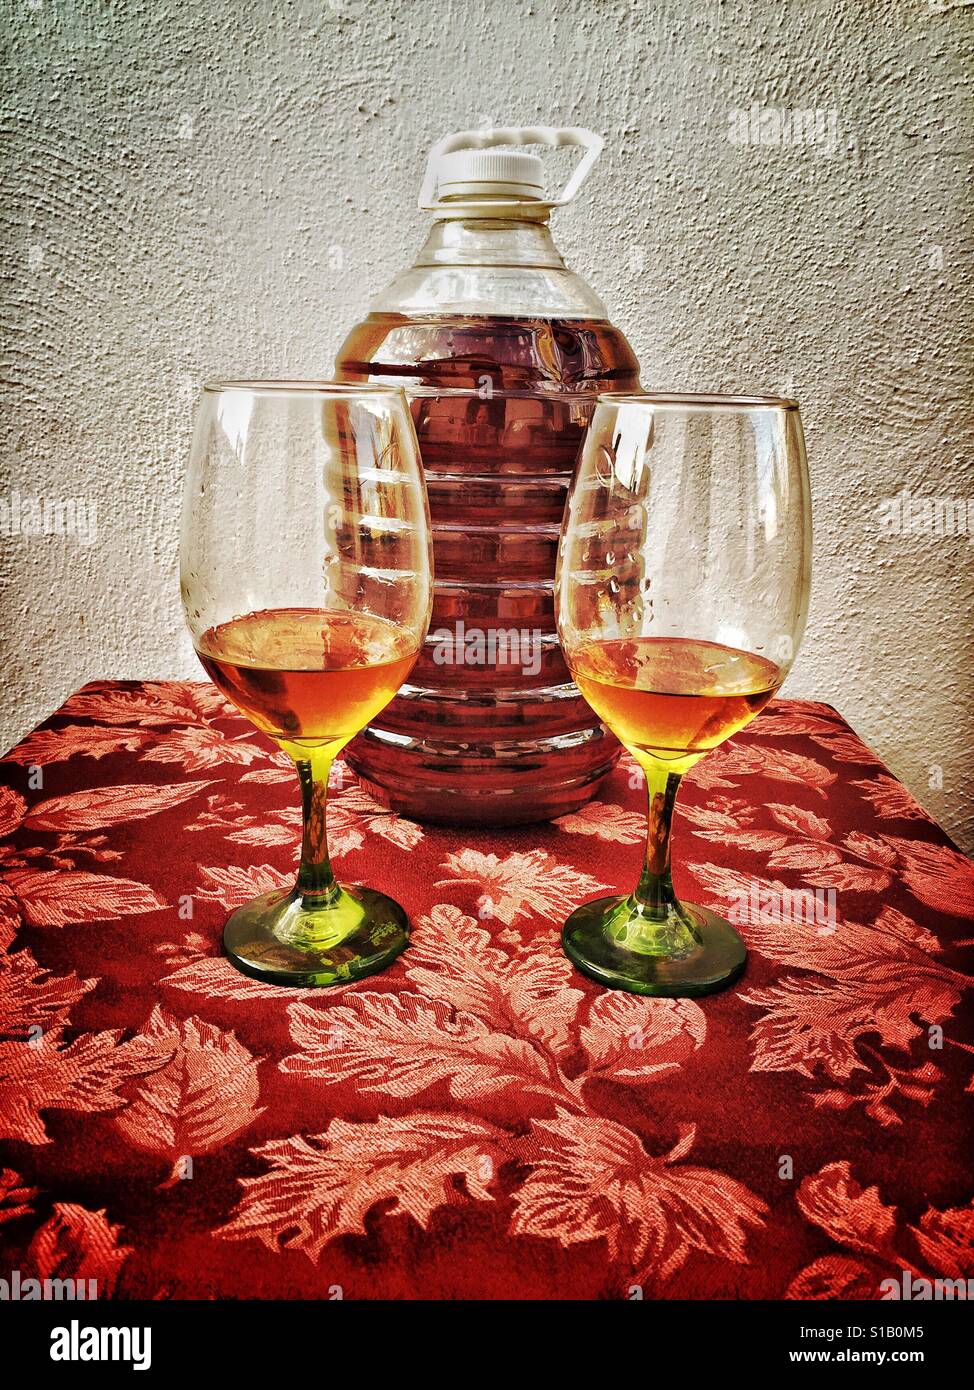 Two glasses of extra añejo sipping tequila are placed in front of a five litre container of tequila. Stock Photo